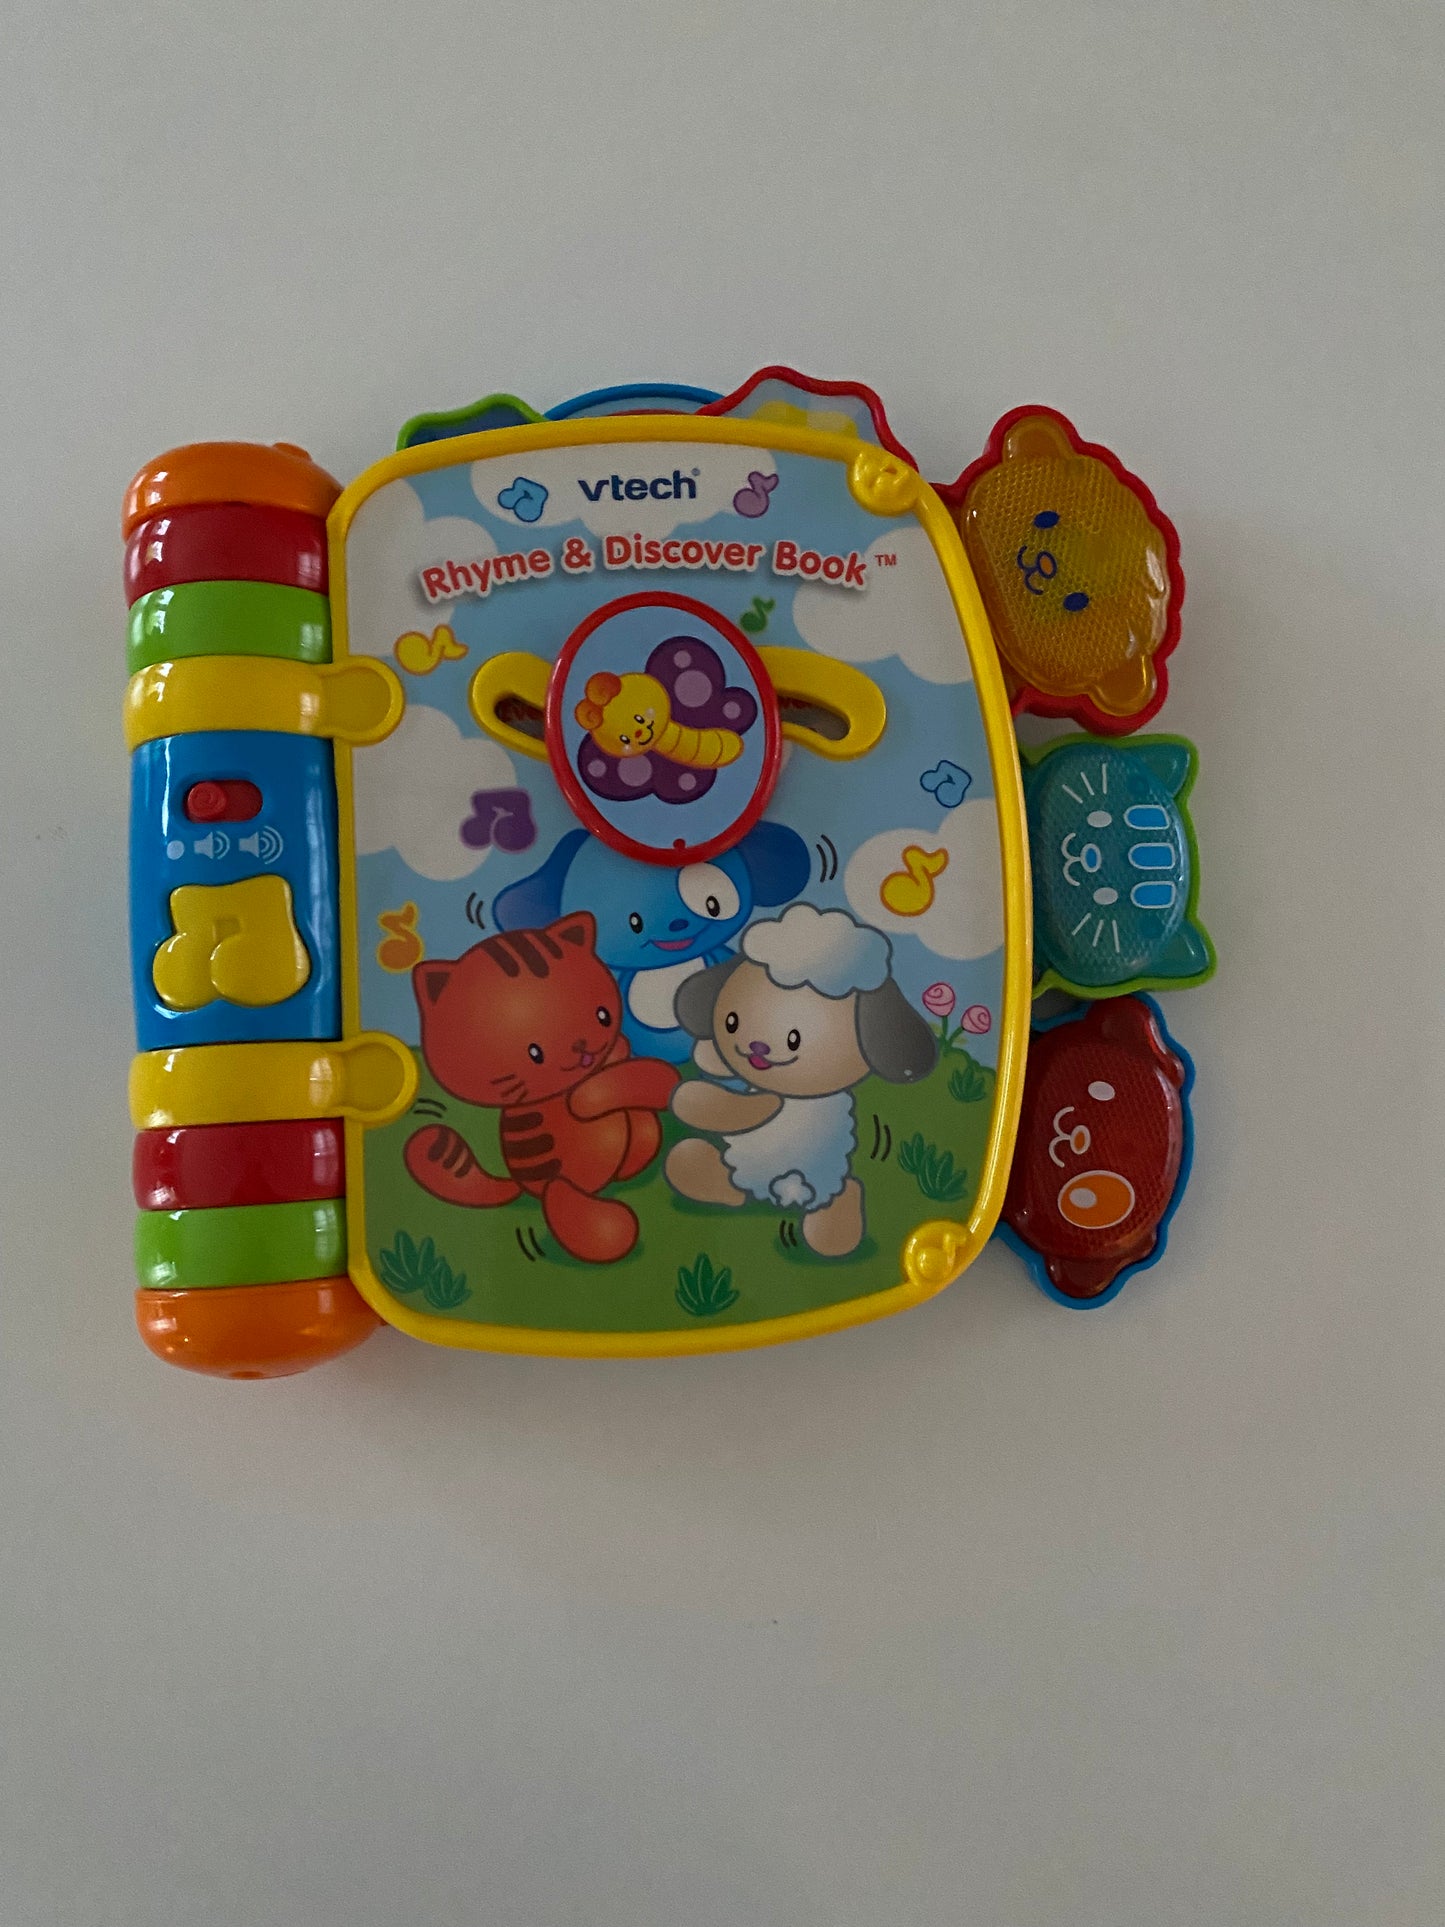 Vtech Rhyme & Discover Book